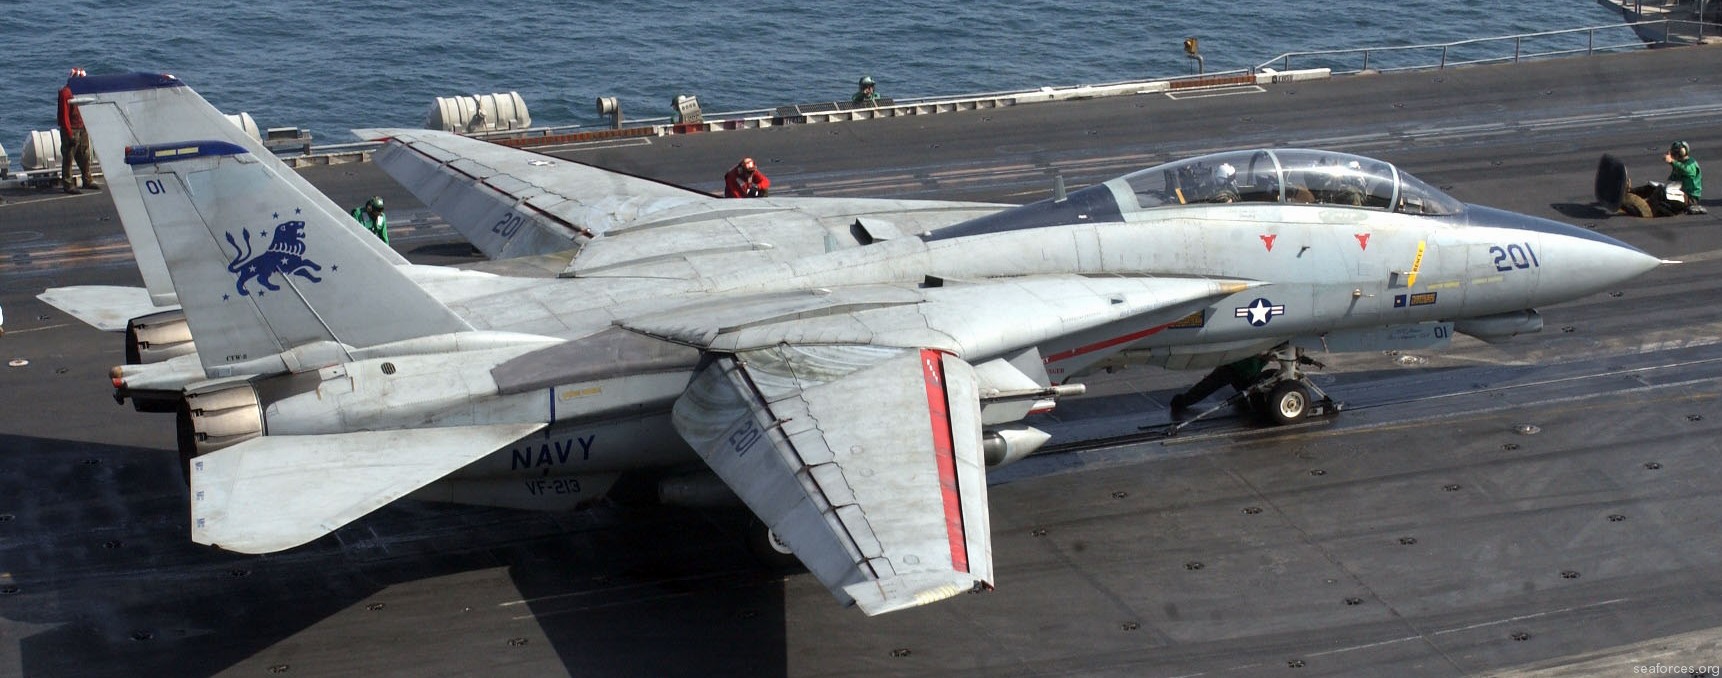 vf-213 black lions fighter squadron us navy f-14d tomcat carrier air wing cvw-8 uss theodore roosevelt cvn-71 16